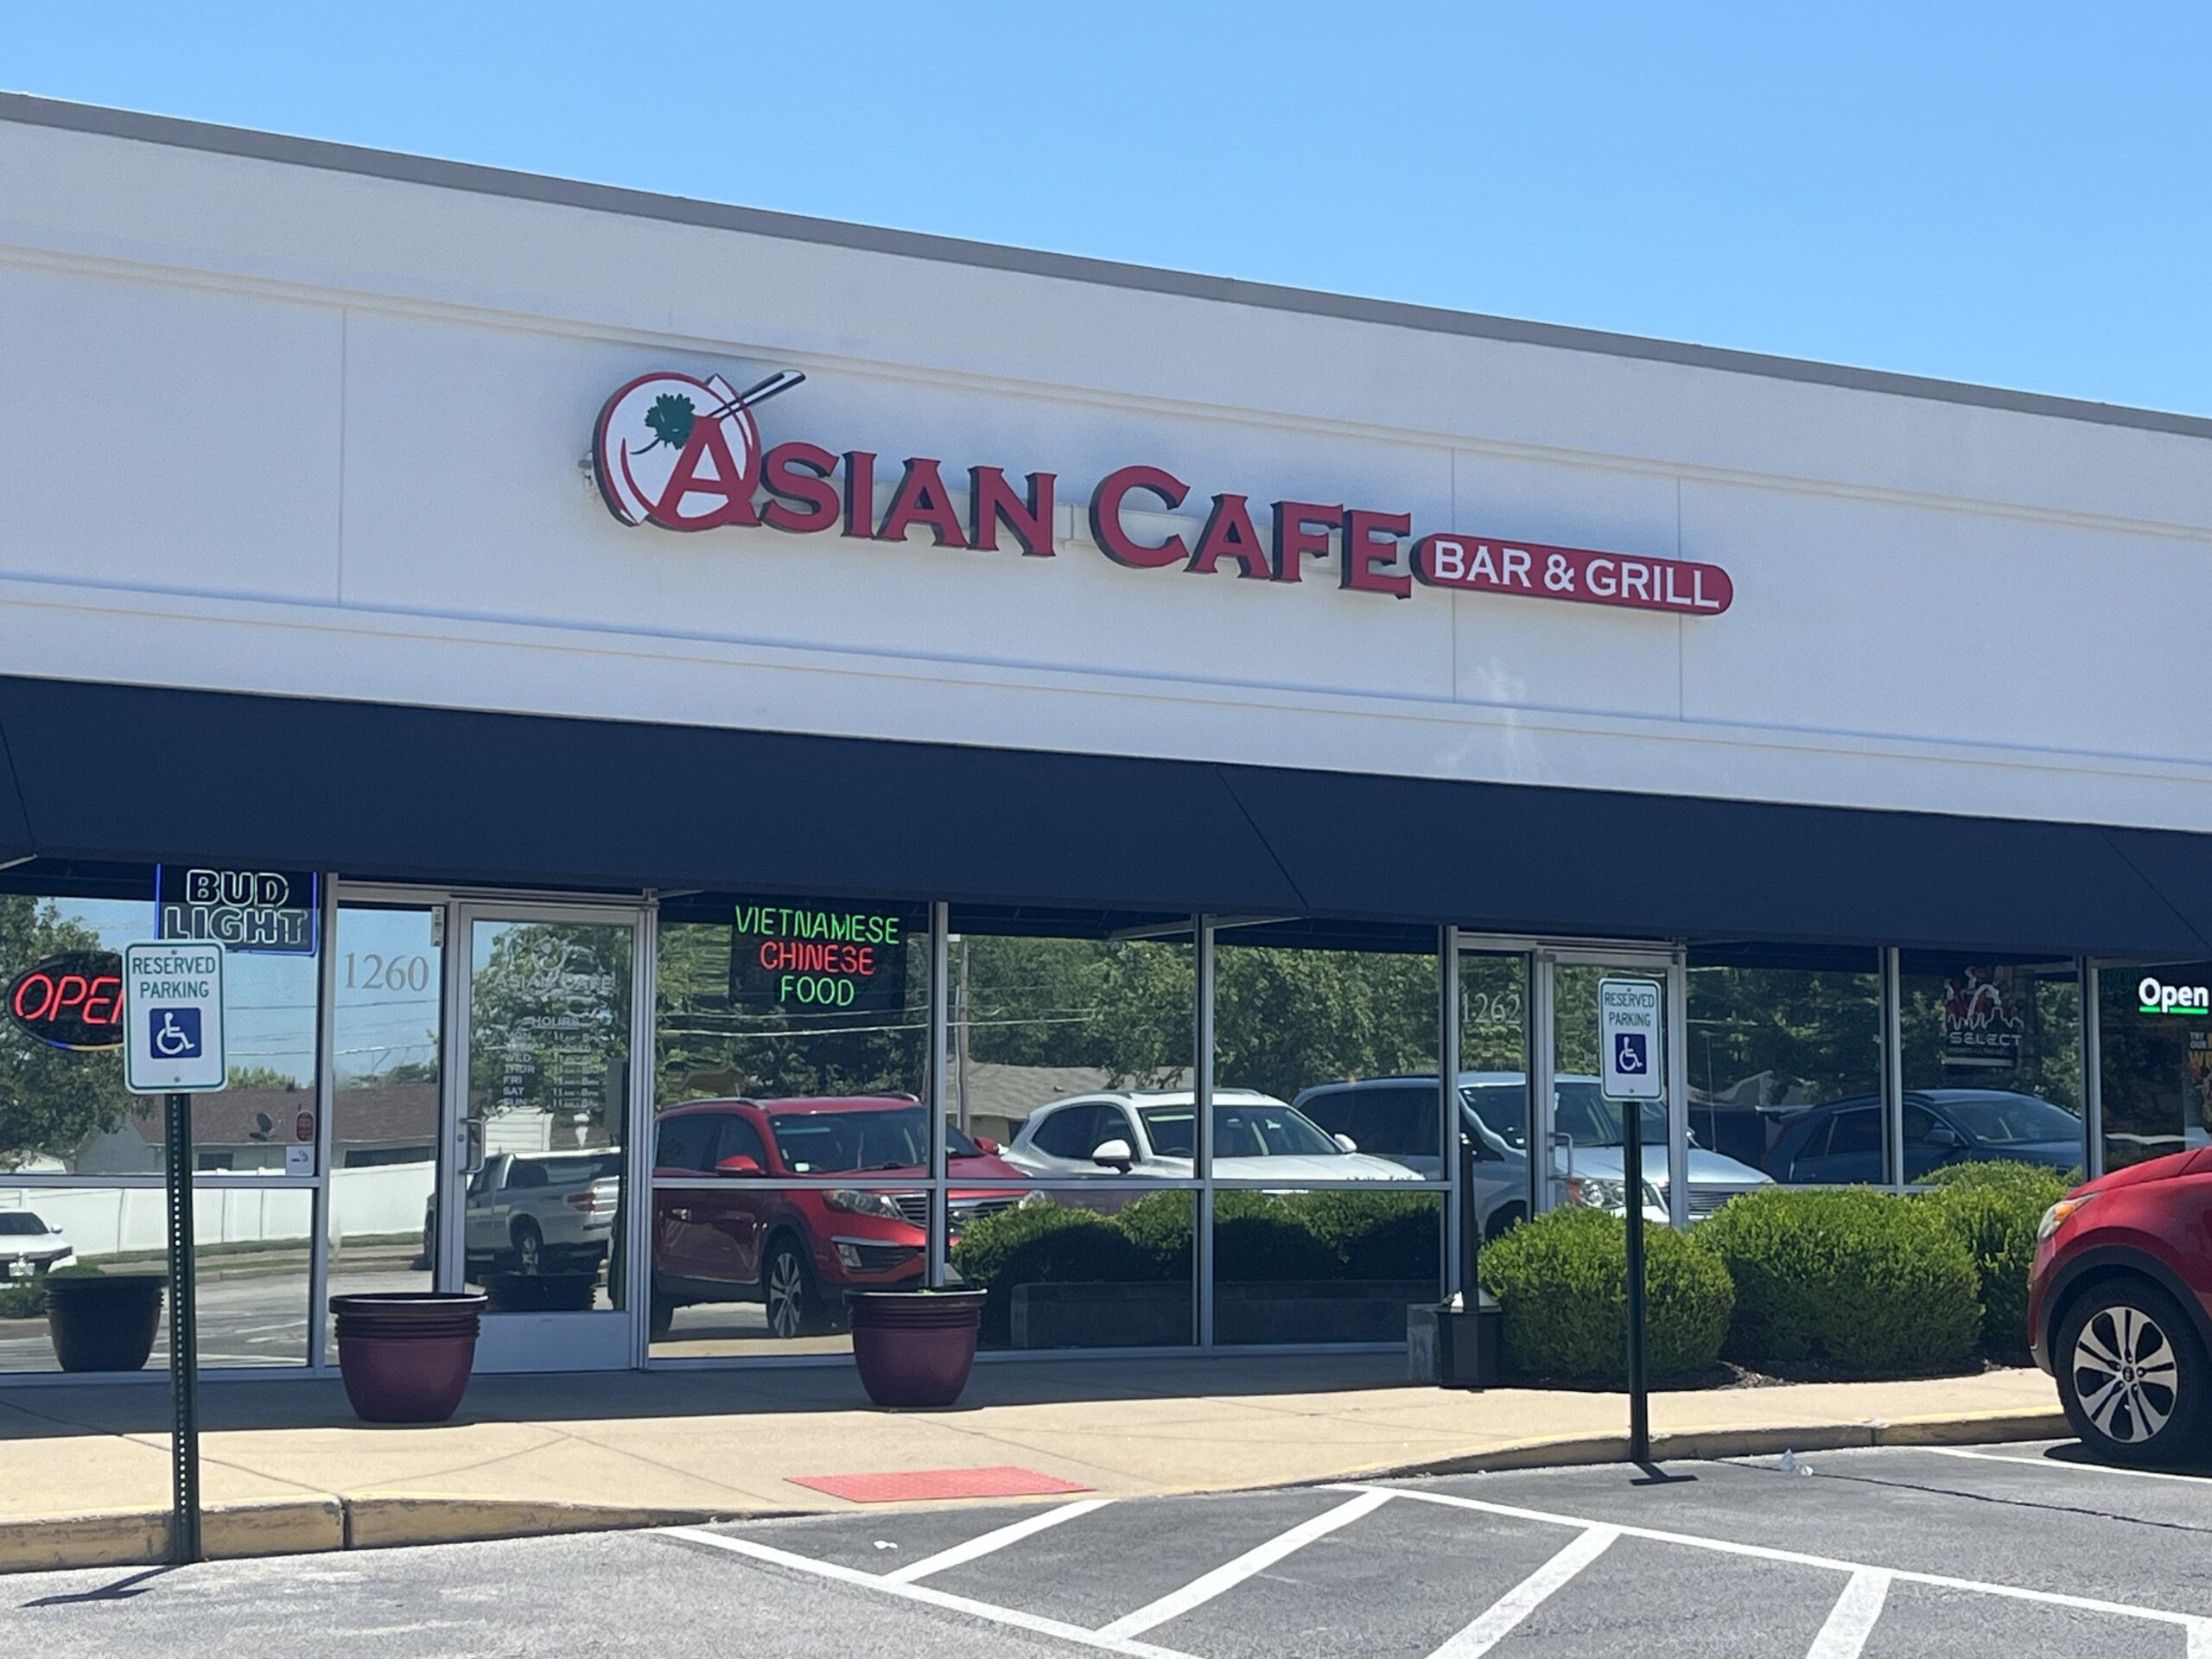 Asian Cafe Bar & Grill – Added to Restaurant Directory